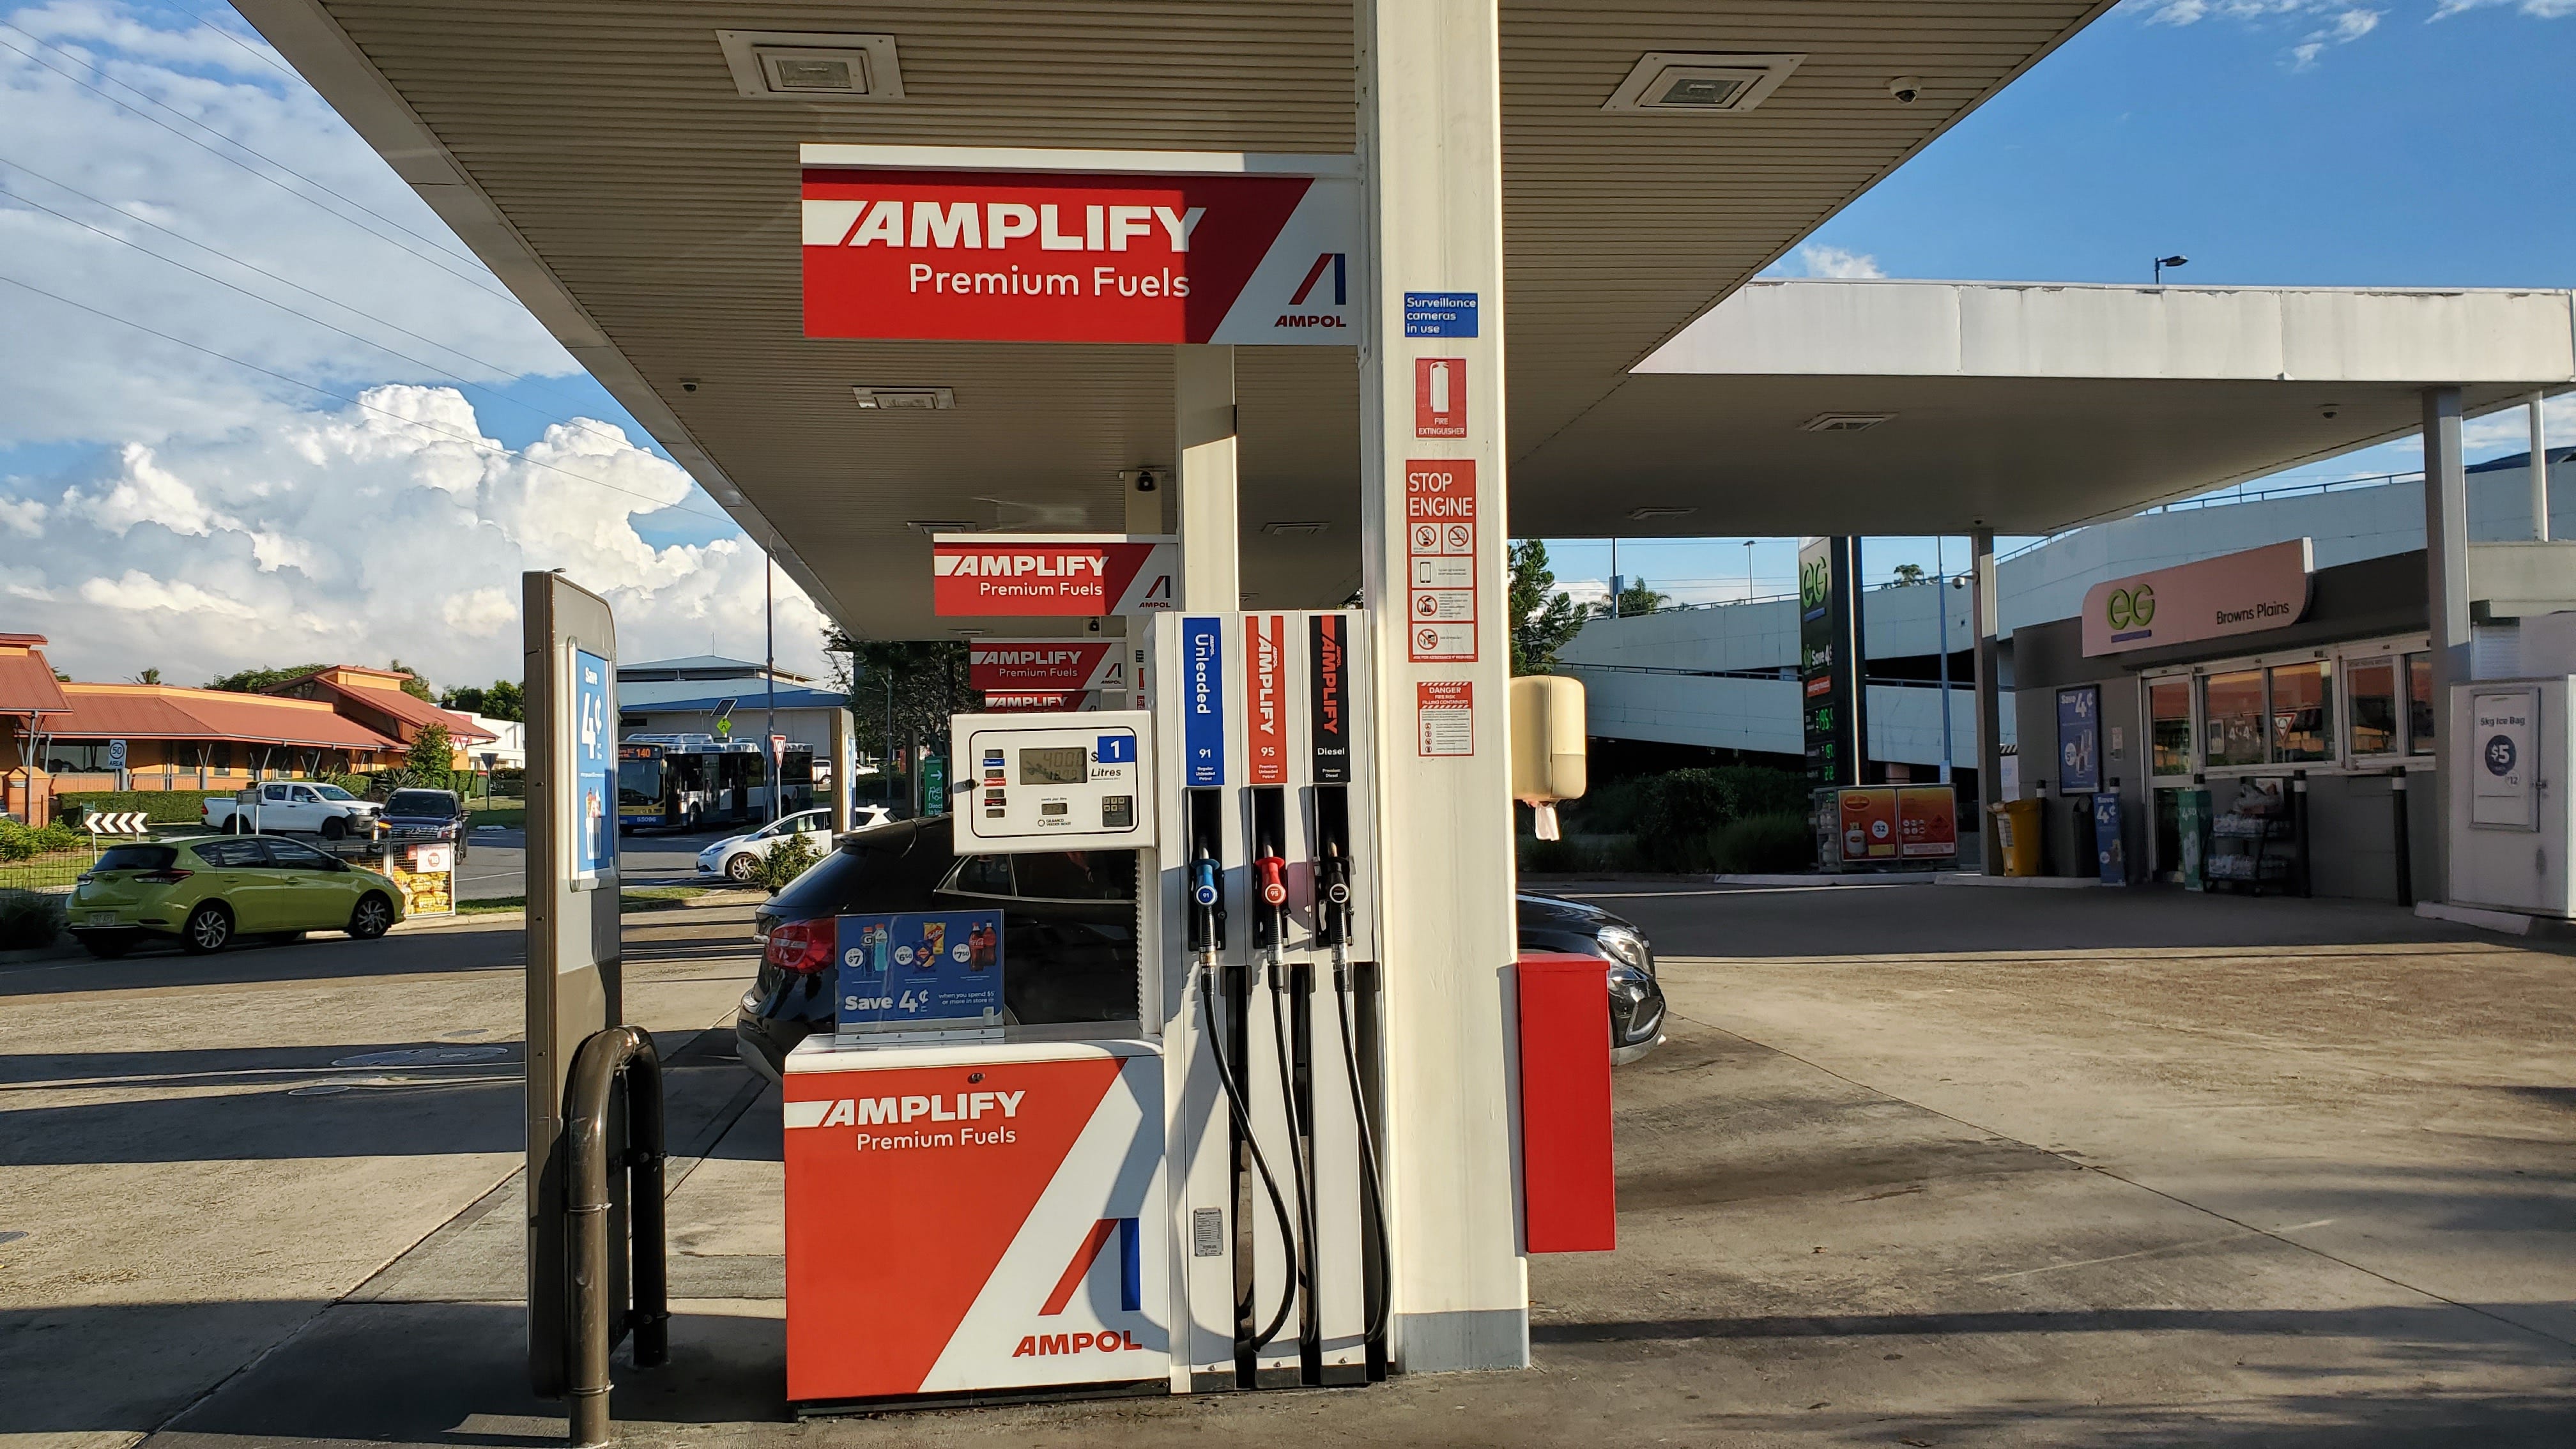 <p>There are a few ways pumping gas — or "petrol," as Aussies call it — differs from the US. </p><p>In the US, I usually either paid at the pump or prepaid inside before pumping gas. But, other than a few <a href="https://www.businessinsider.com/costco-shoppers-share-the-best-things-to-buy-photos-list">Costco</a> locations, I've yet to find any gas station here that allows me to pay with my card at the pump. </p><p>In Australia, you pump your gas and then pay. You have to go inside to pay for your gas — perhaps this helps encourage customers to spend more money at the servo (gas station). </p><p>This practice is actually common in a number of places around the world, it's just <a href="https://www.businessinsider.com/things-normal-in-the-us-but-considered-weird-2018-8">not the norm in the US</a>. </p>